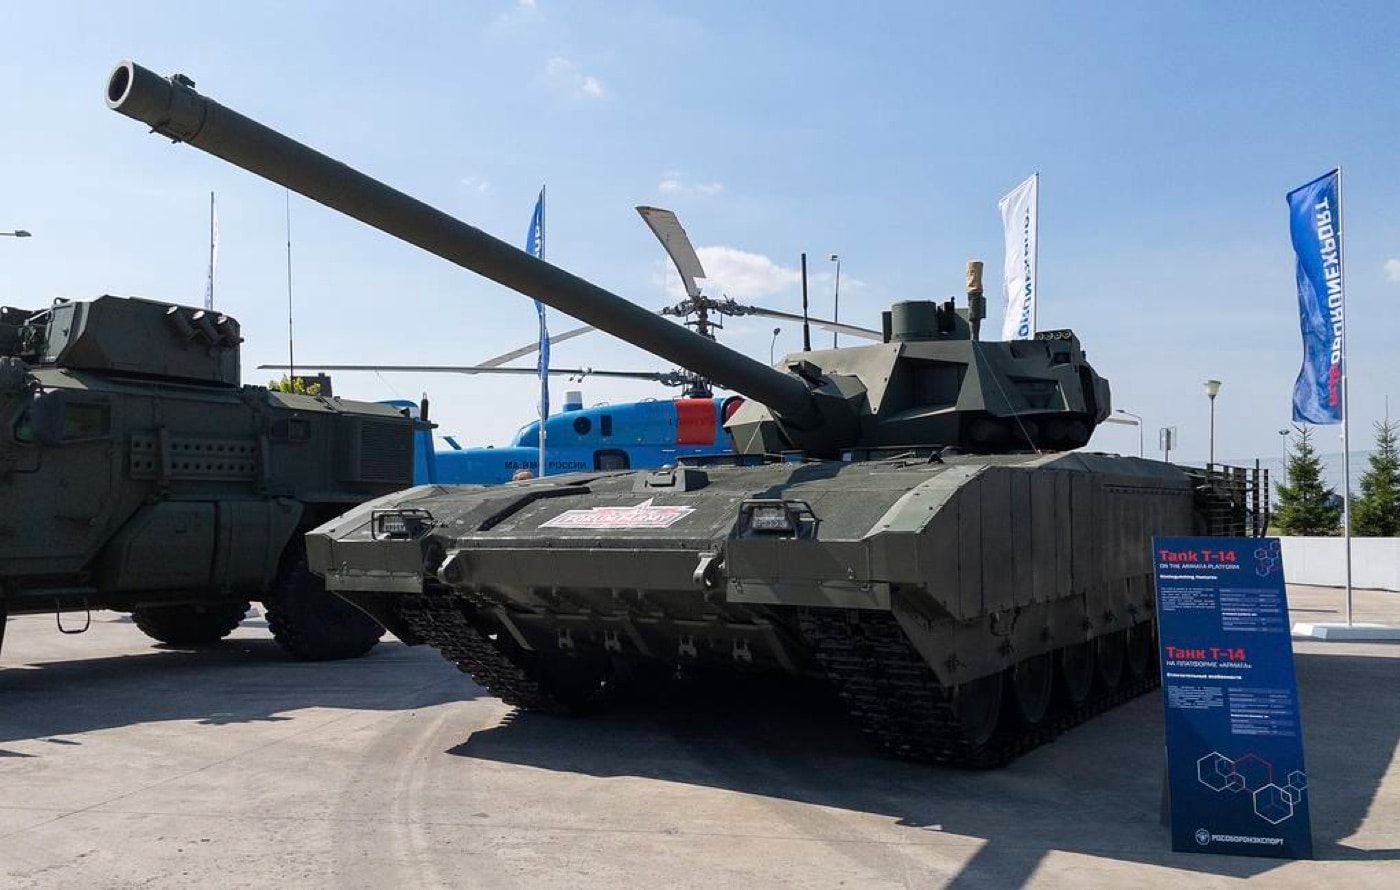 In this photo, we see the T-14 Armata had been eagerly anticipated on display during a exhibition. More than 2,000 tanks were supposed to be delivered by 2025. However, few have actually been manufactured. In the national interest, Russia moved production back to T-90 tanks and updating old T62 and T-72 tanks. Russia's new T-14 would be deployed to Ukraine if they had them in any sizeable quantity. It is a piece of equipment that would provide a huge boost - if only a morale one. Due to sanctions, many of the parts for the new tanks have dogged with delays the tank.